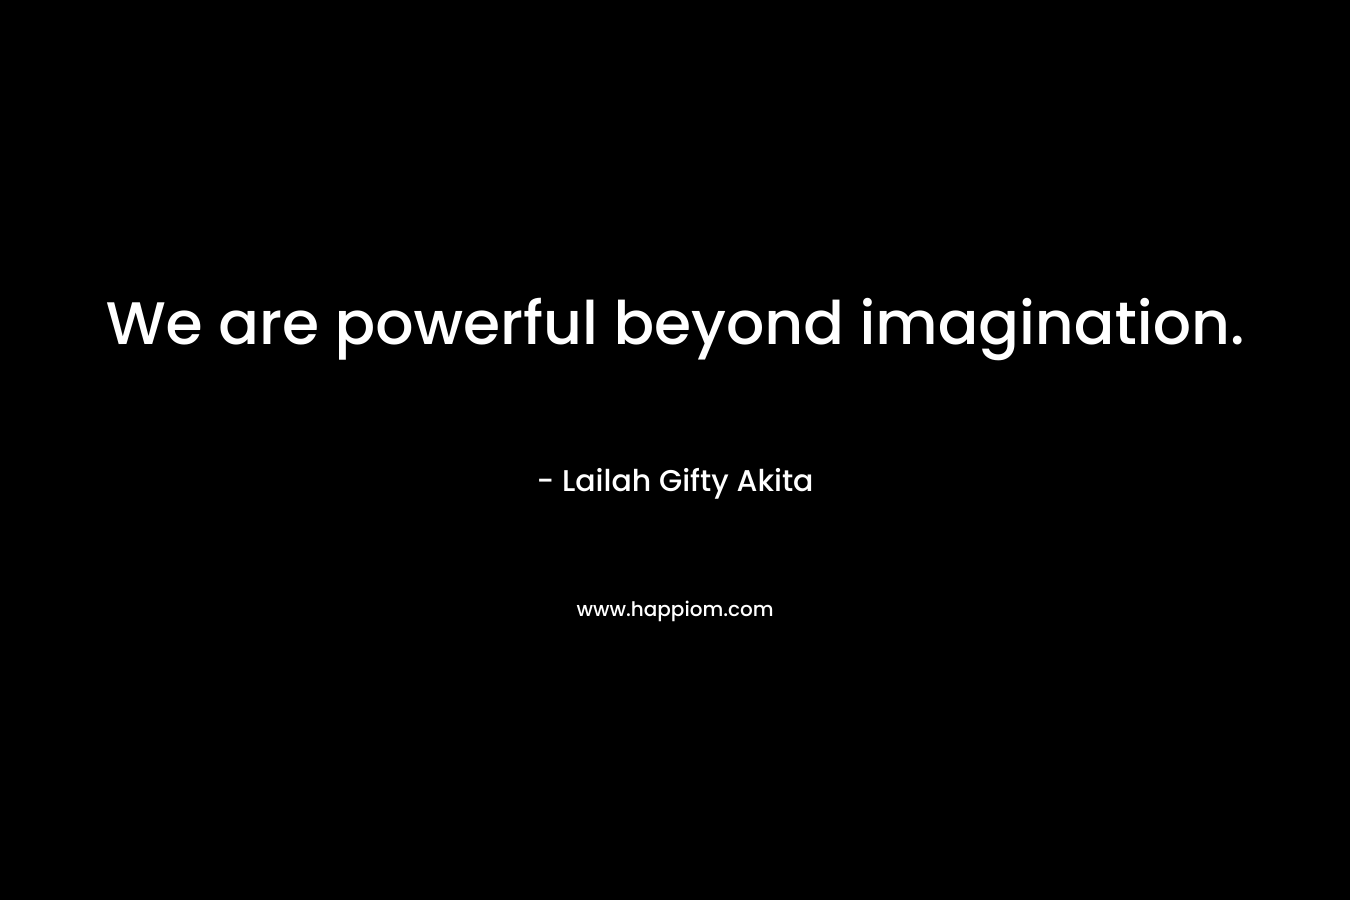 We are powerful beyond imagination.